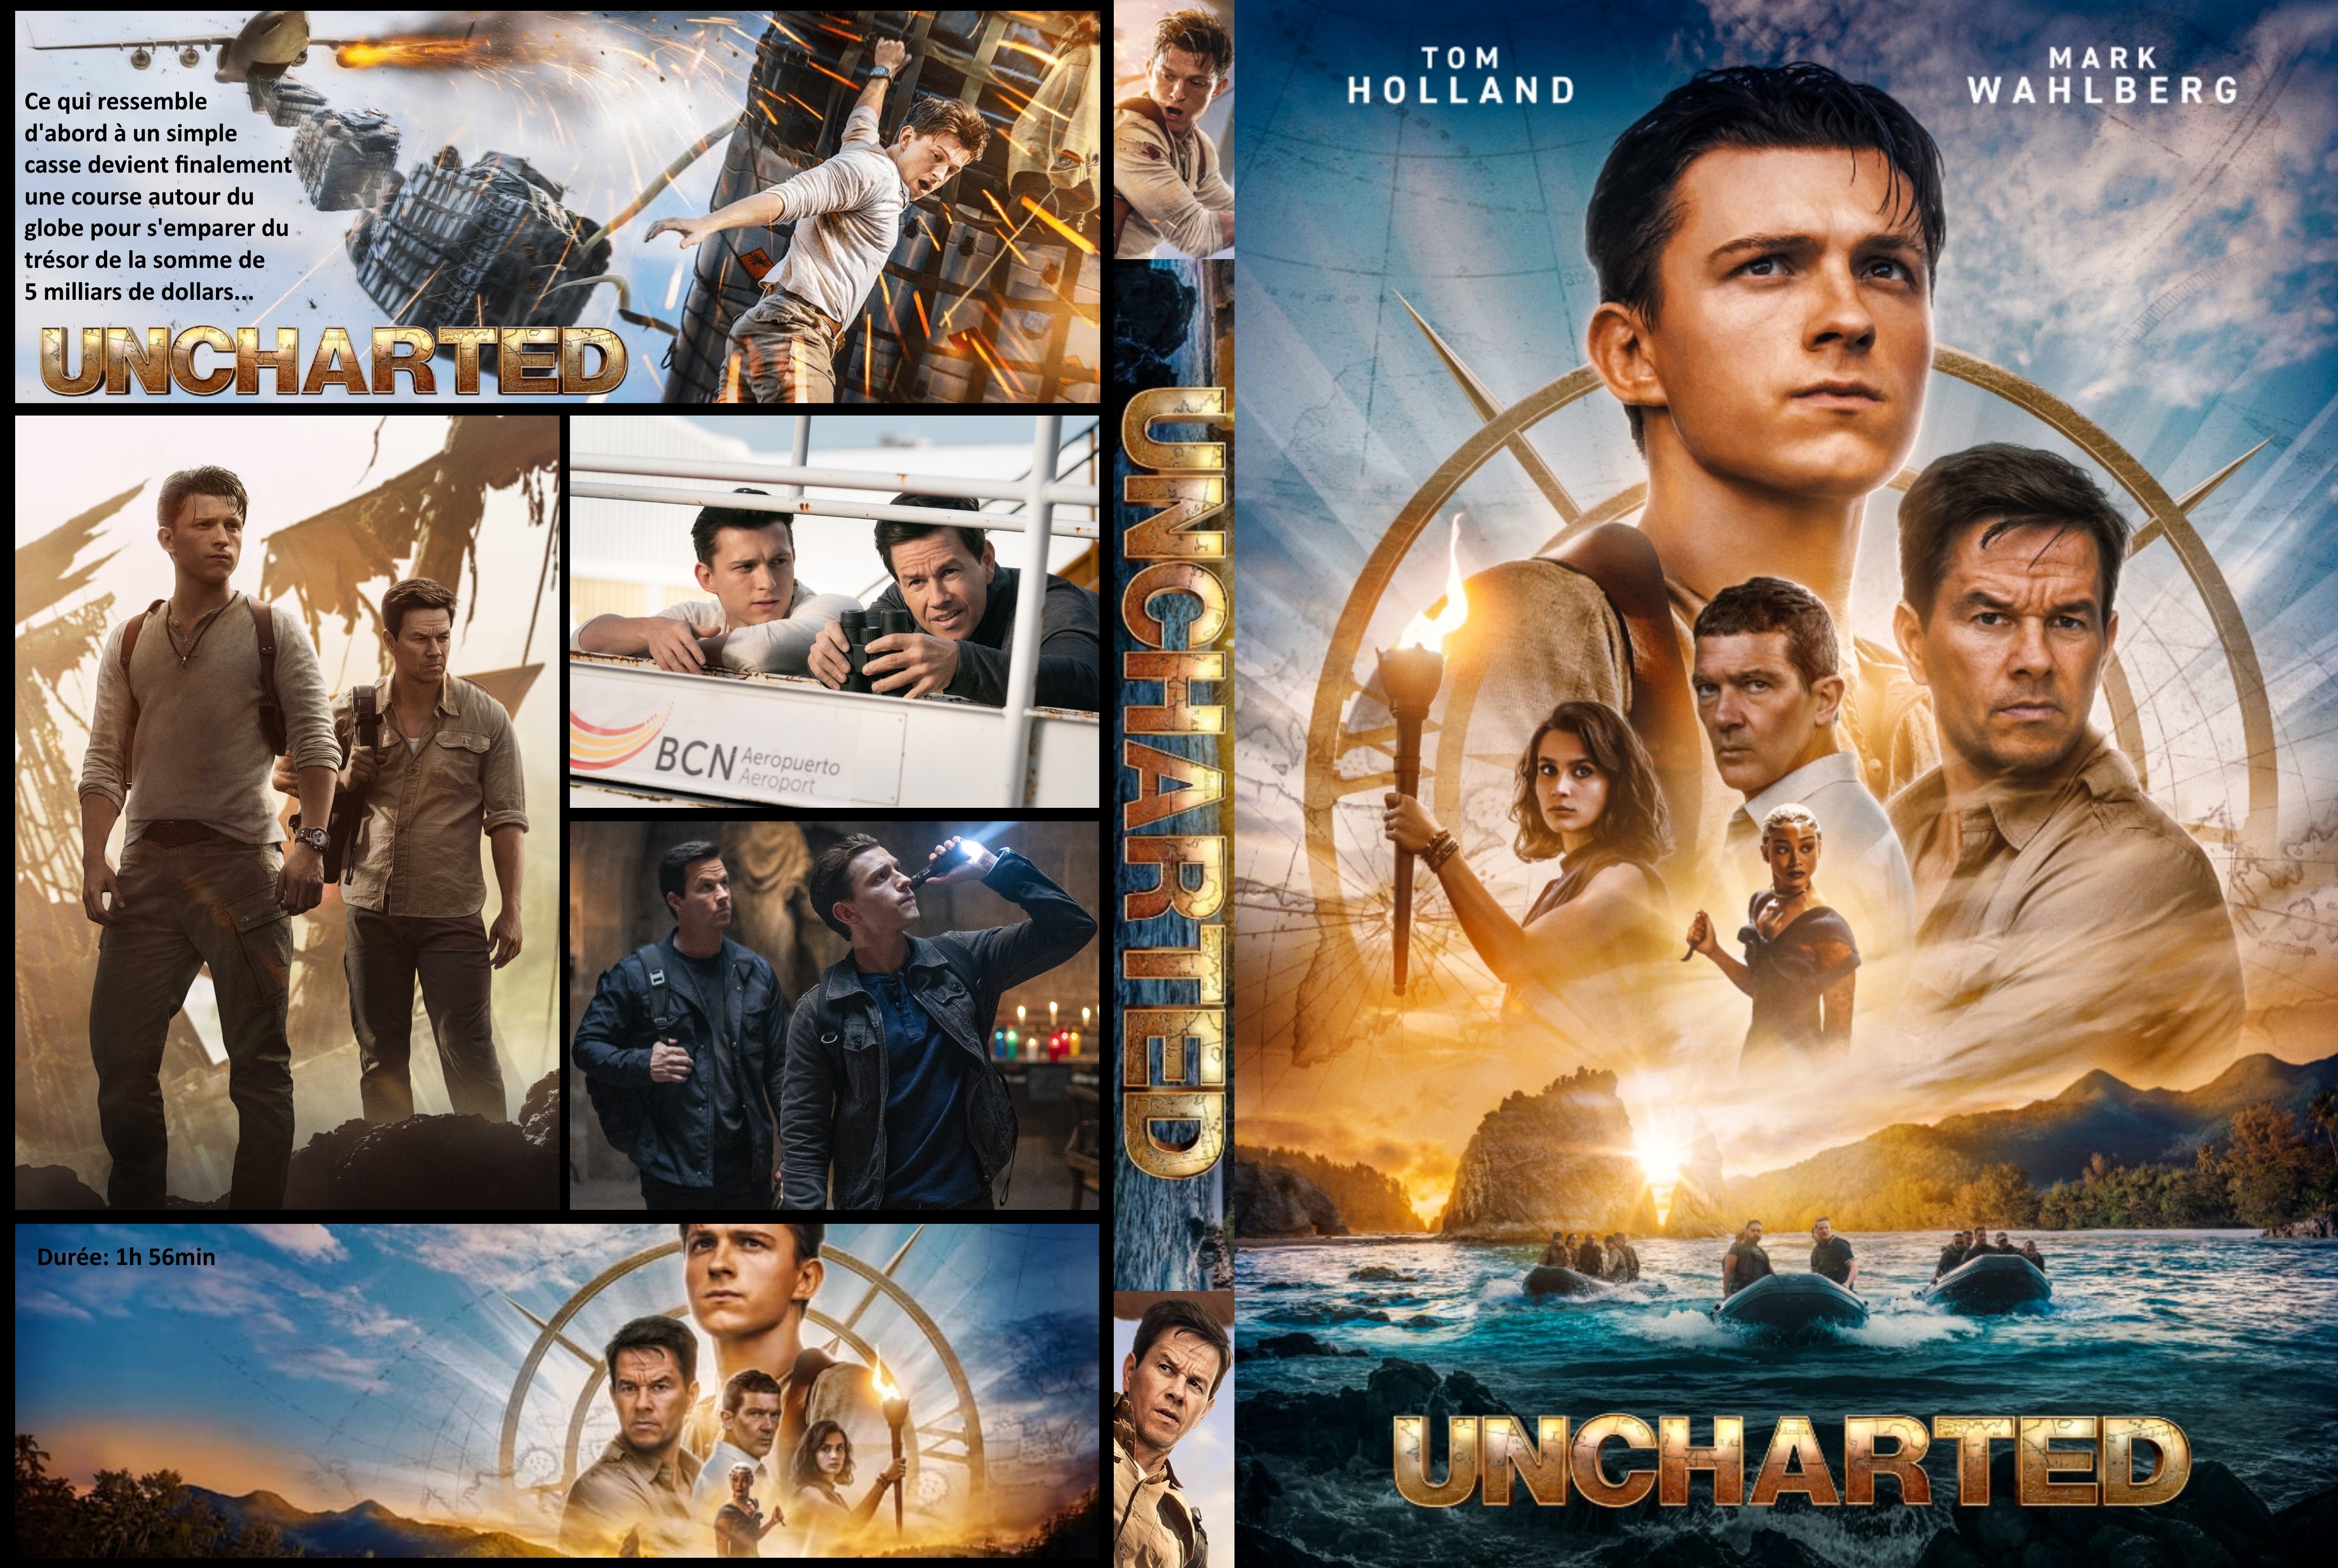 Jaquette DVD Uncharted custom